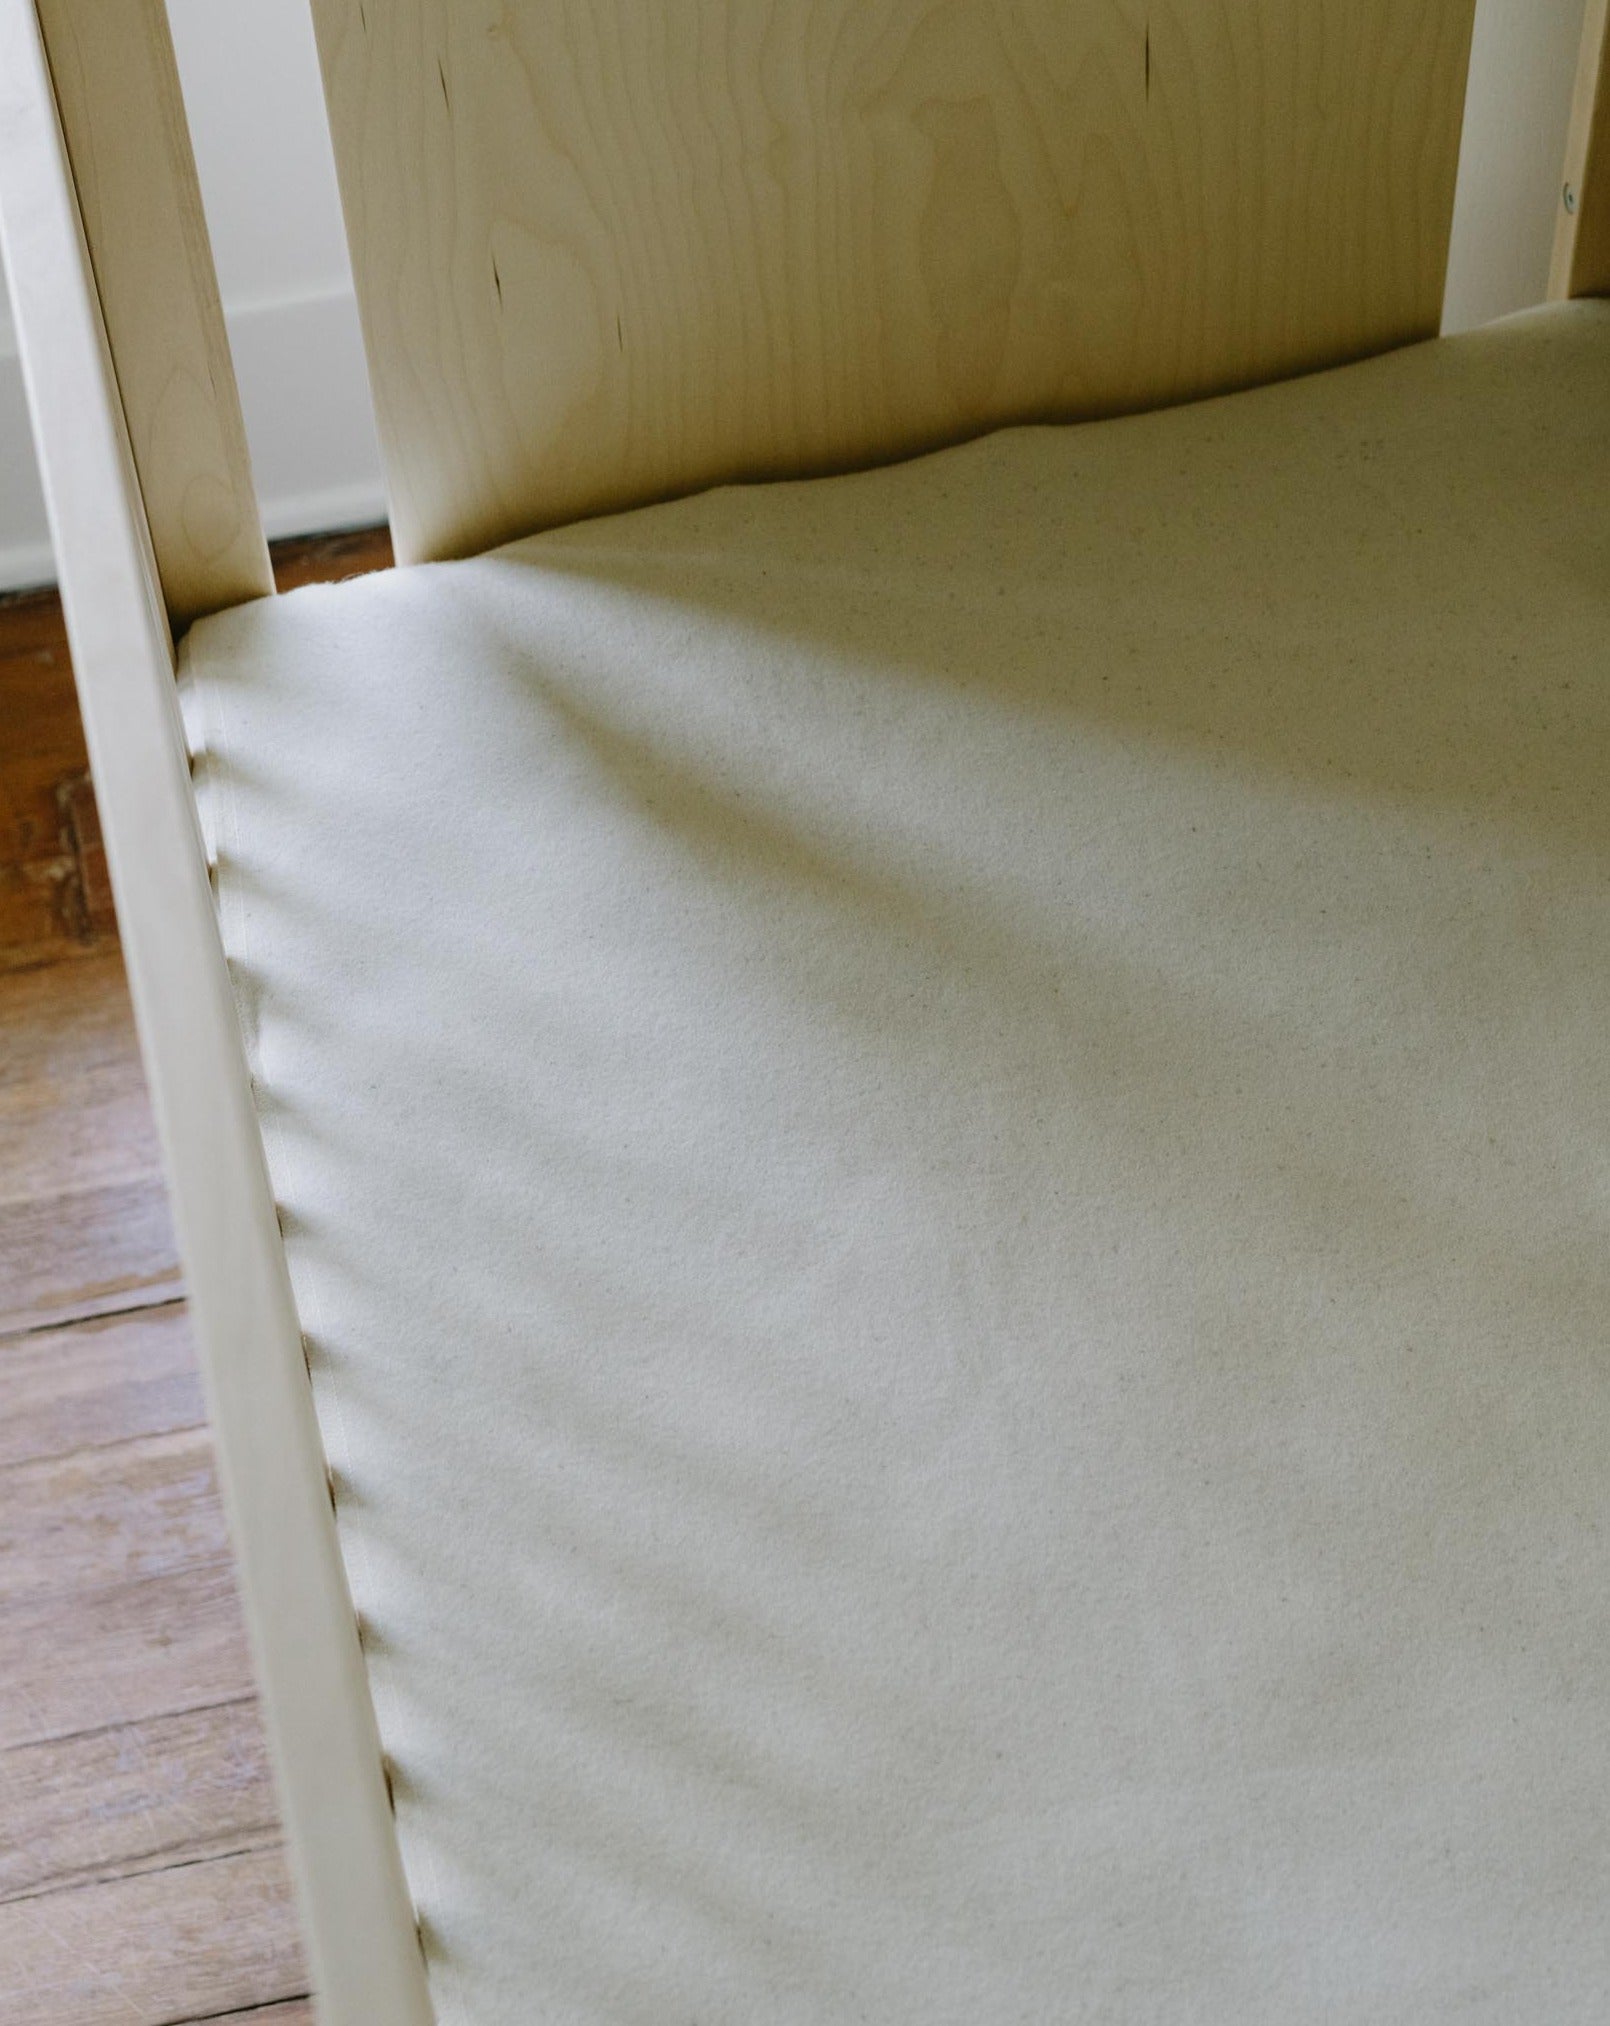 Made with naturally water repellent fabric, the Premium Eco Wool™ Puddle Pad offers the perfect chemical-free solution for mattress and topper protection for babies and youngsters.